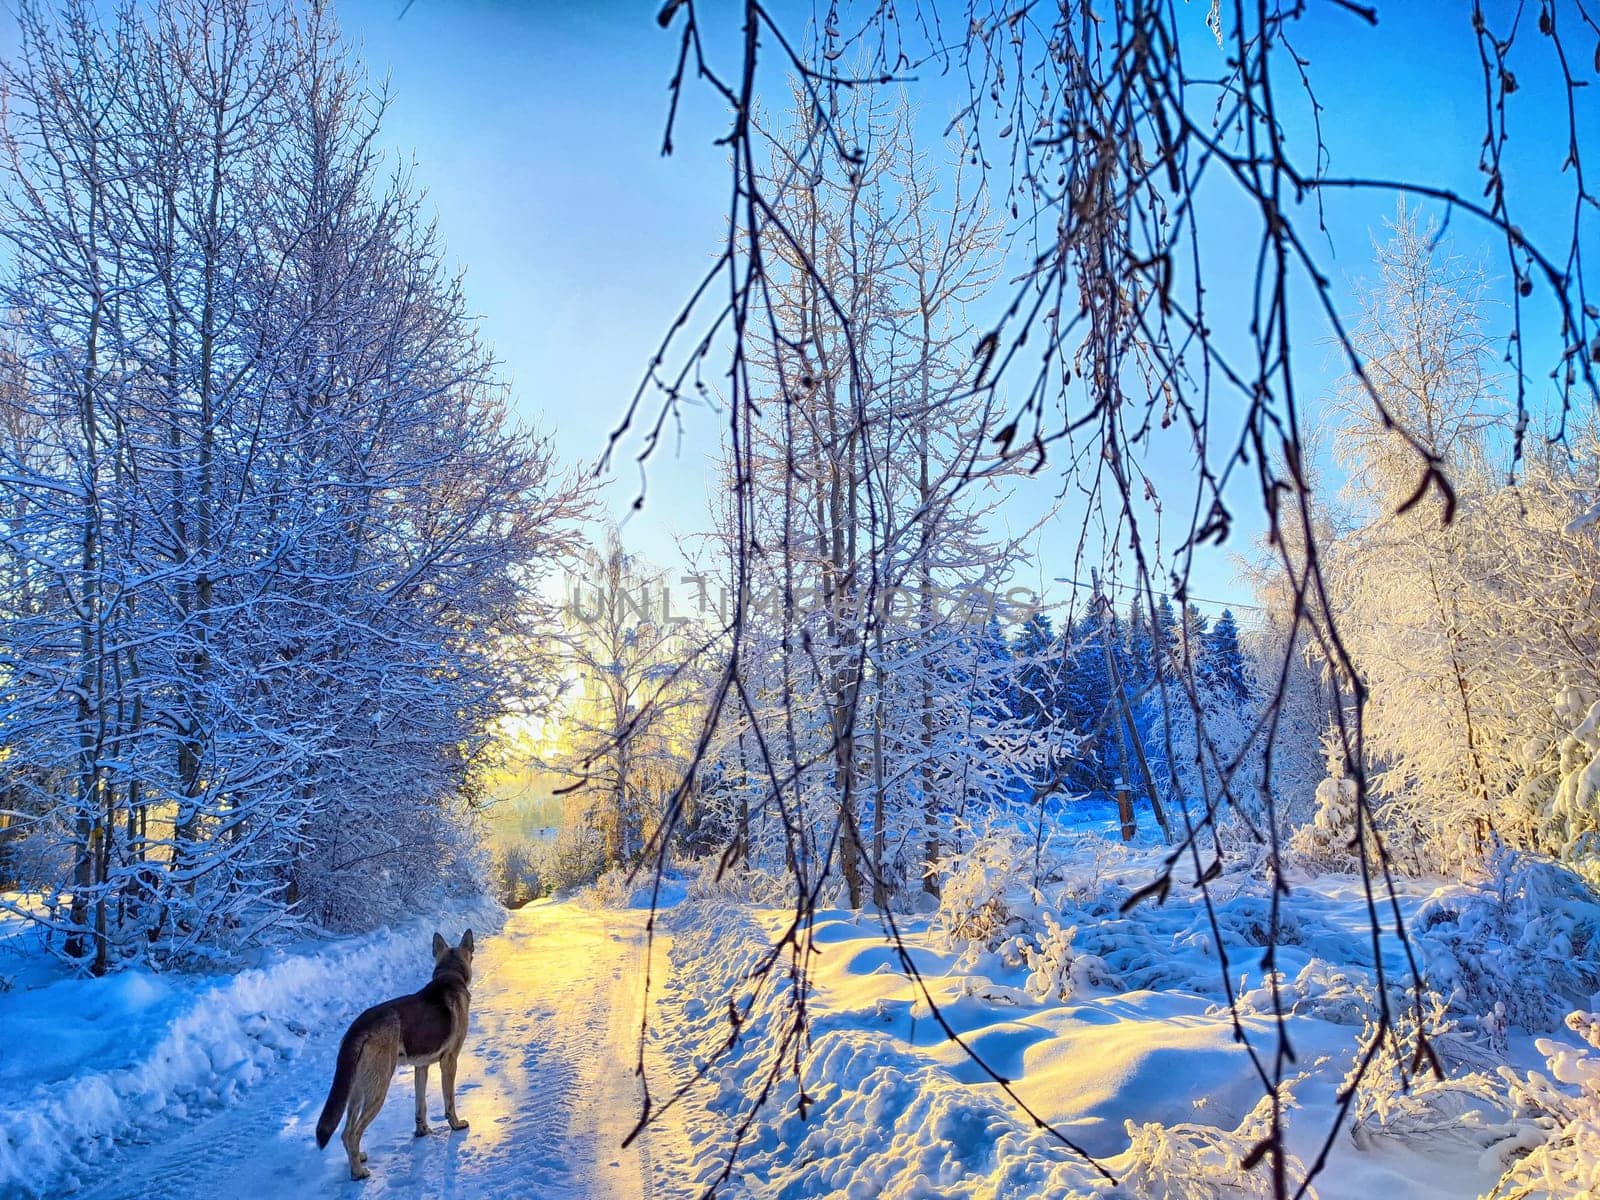 Tranquil Winter Morning With Dog on a Snowy Forest Path by keleny